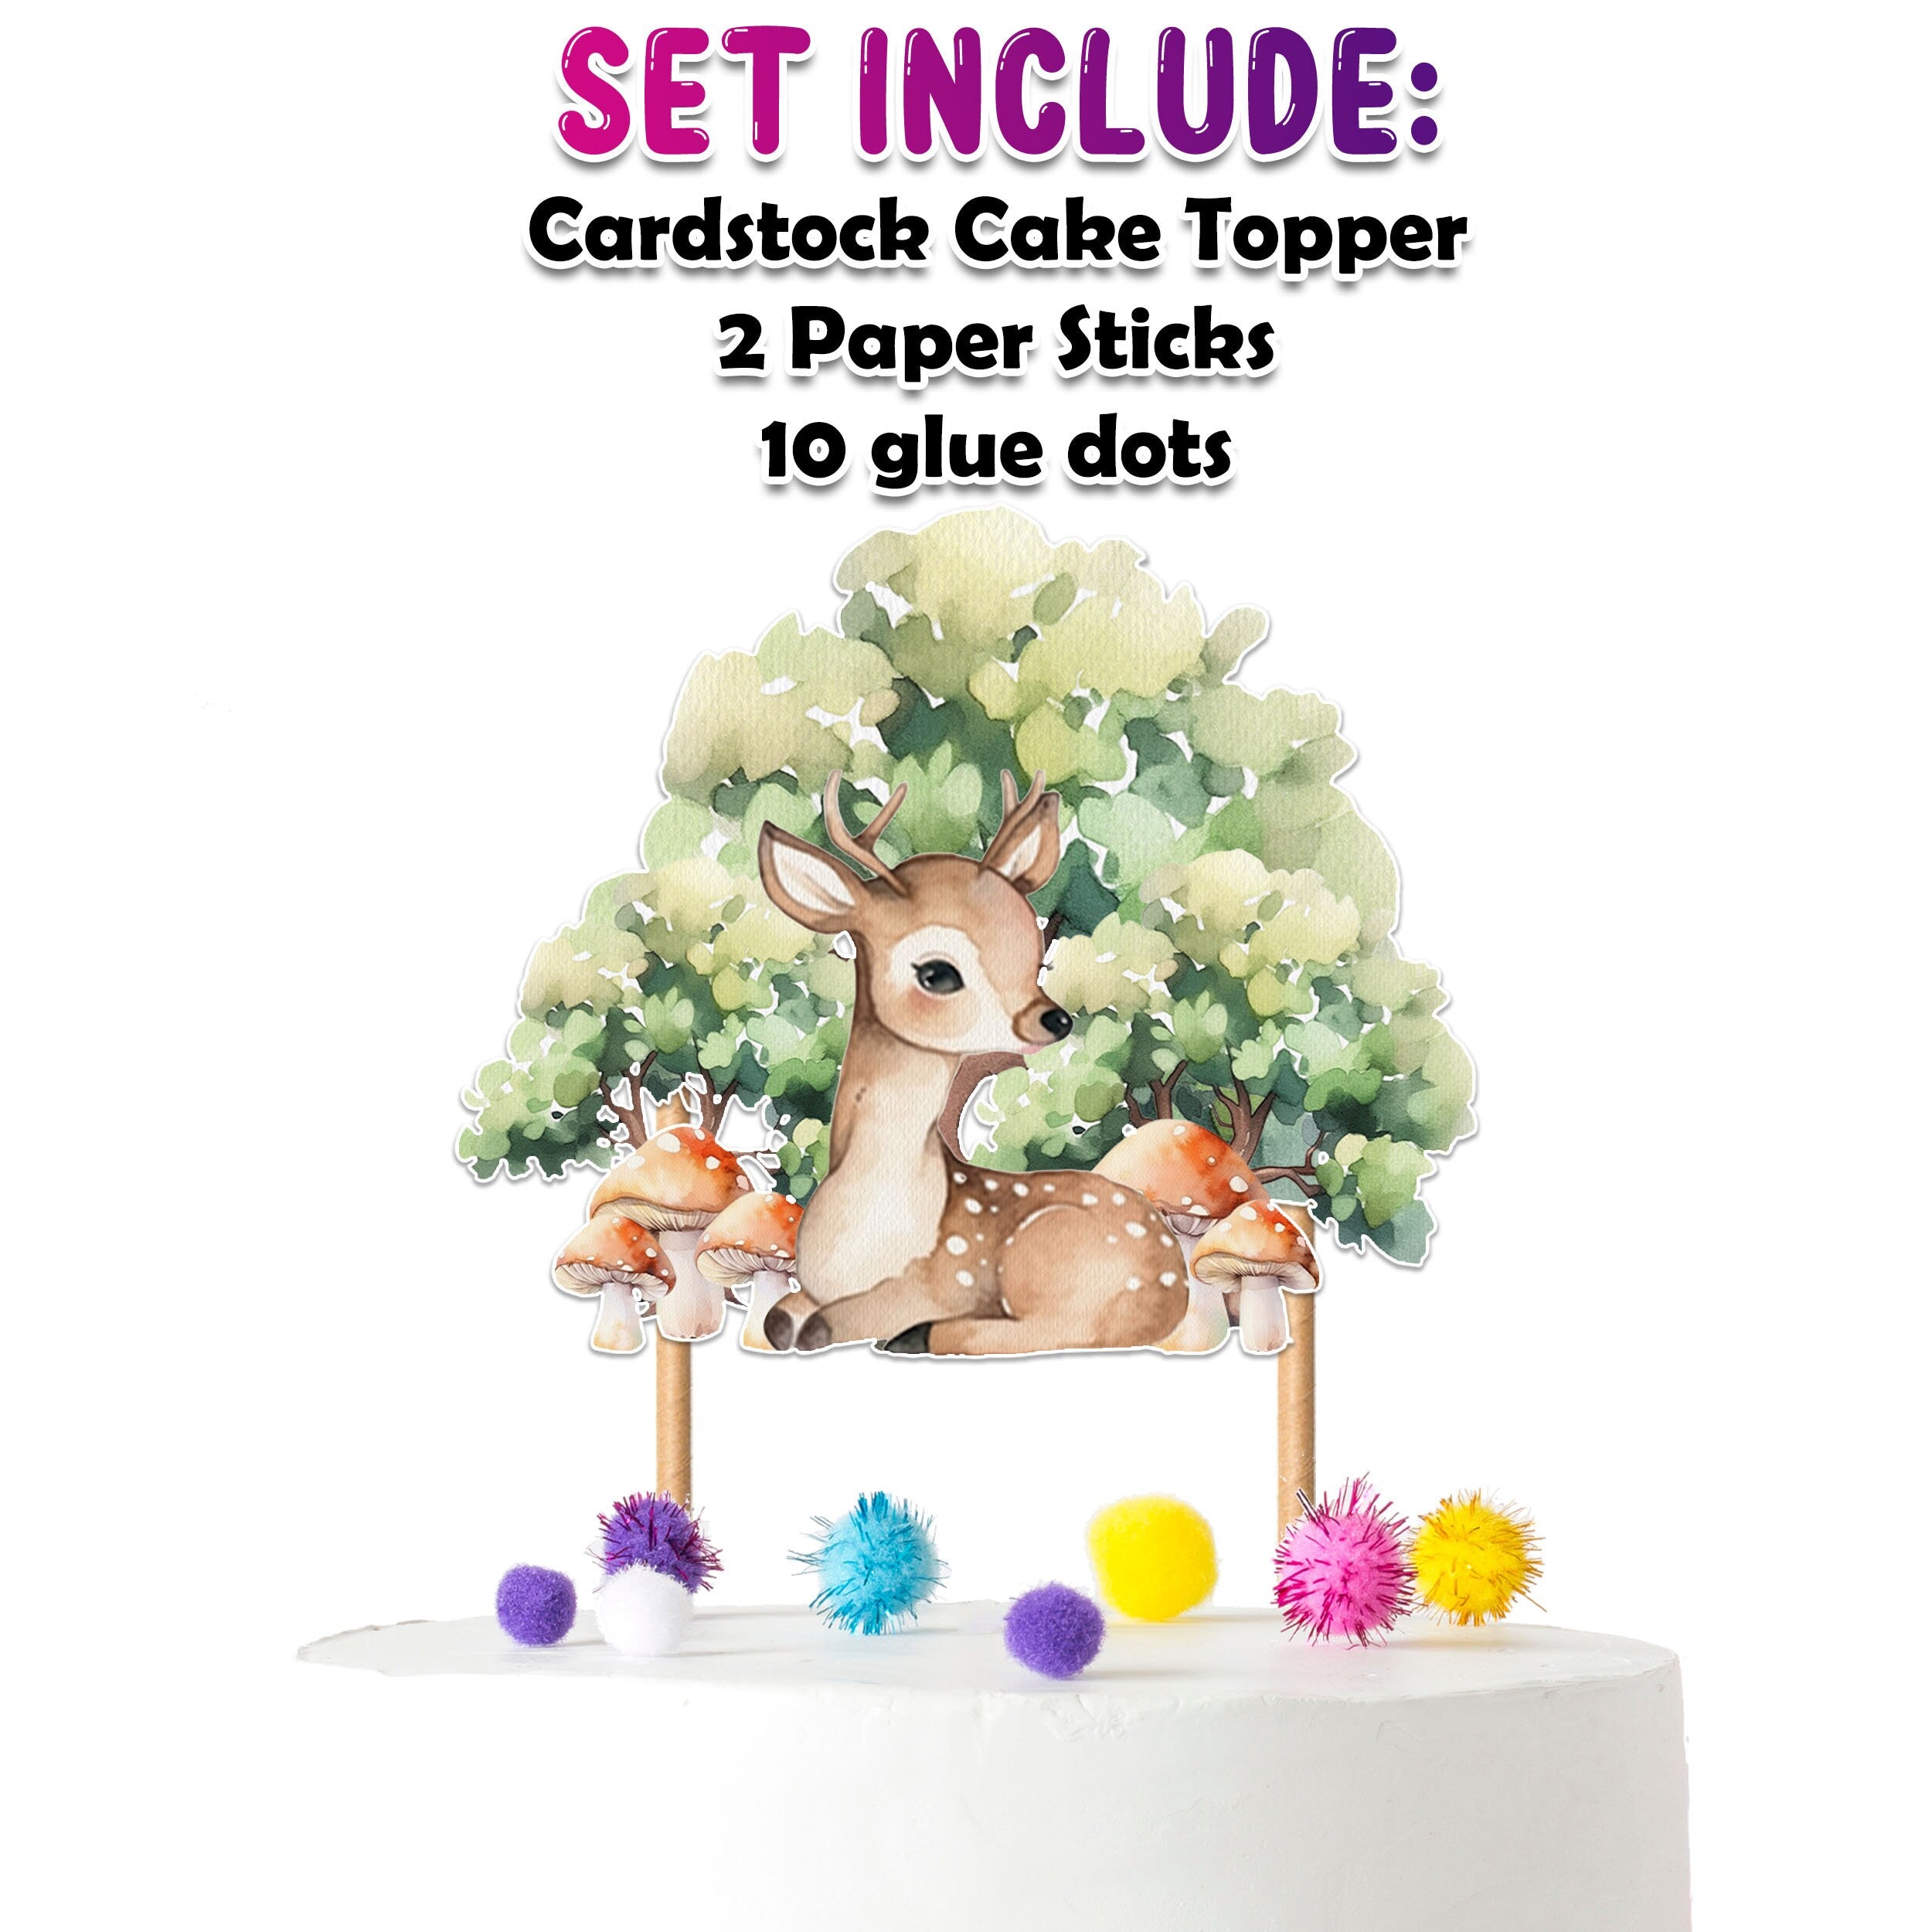 Charming Rustic Deer Cartoon Cake Topper for Enchanted Forest Themed Parties